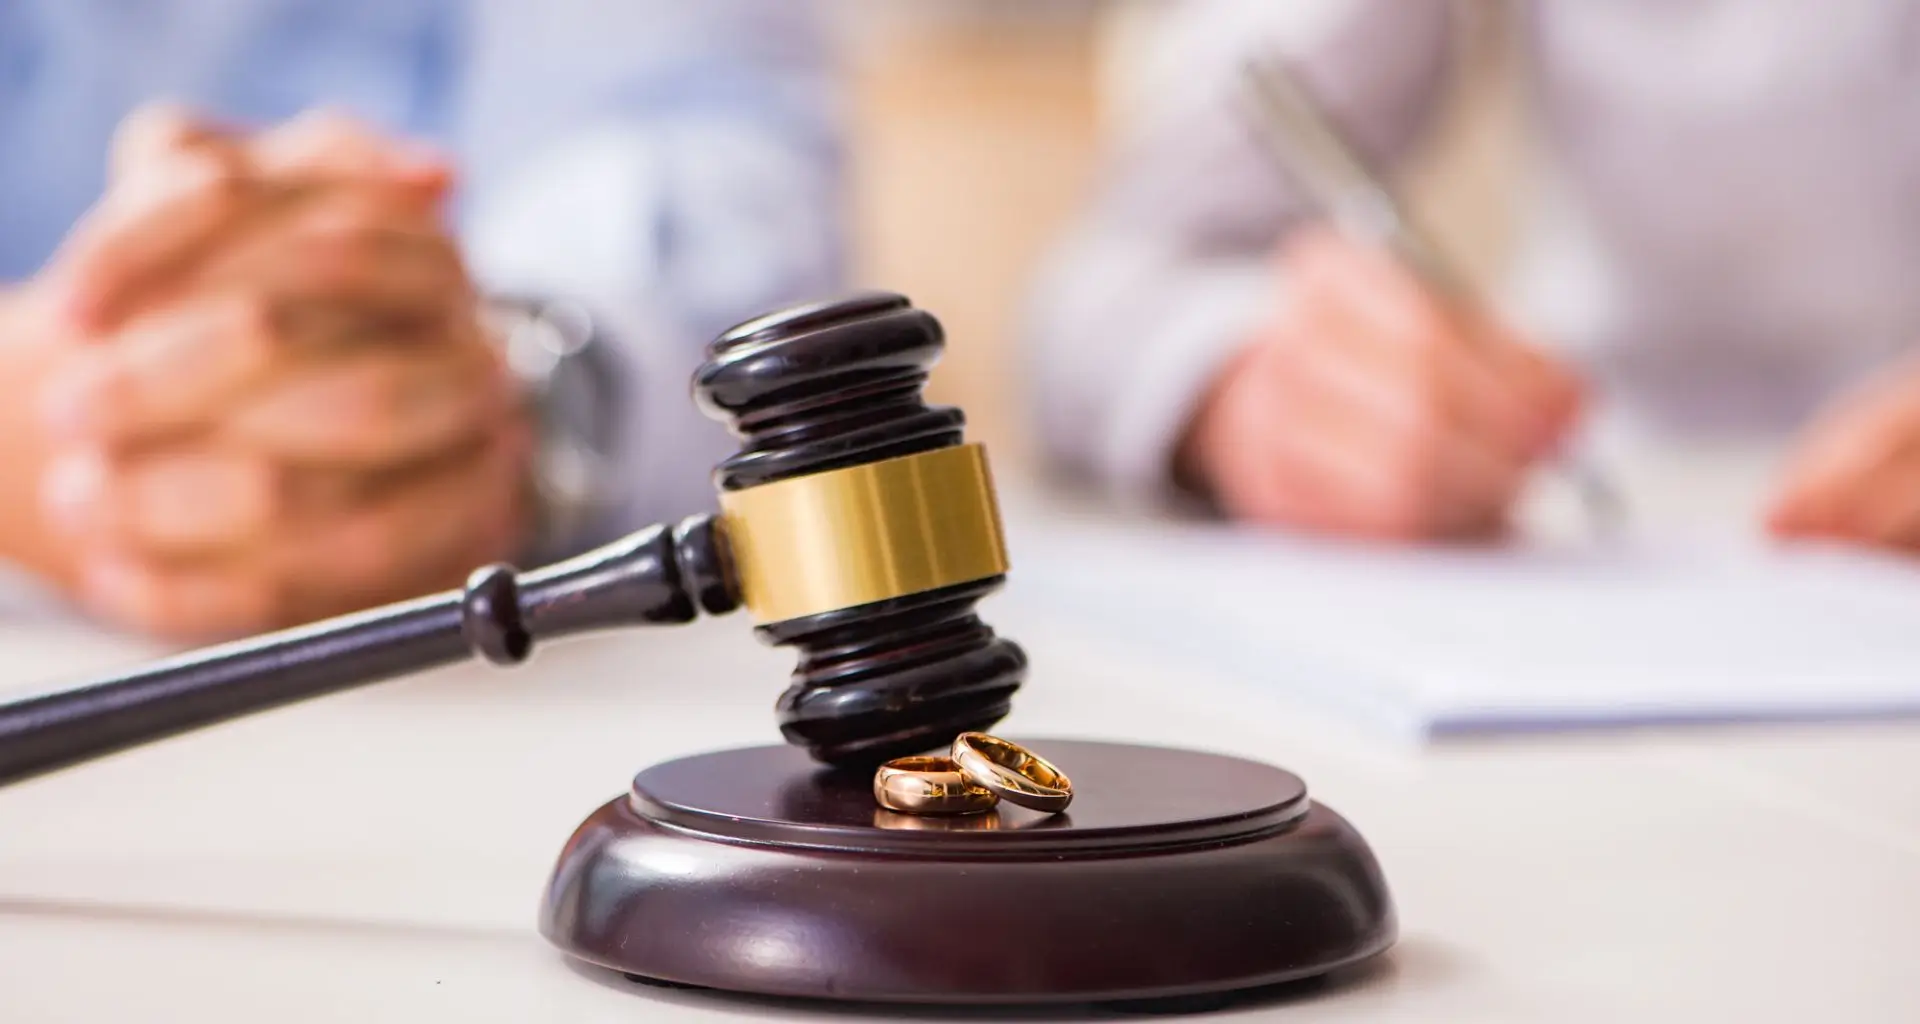 Gavel and wedding rings on a table during divorce proceedings, emphasizing the role of hair drug and alcohol testing in legal decisions.